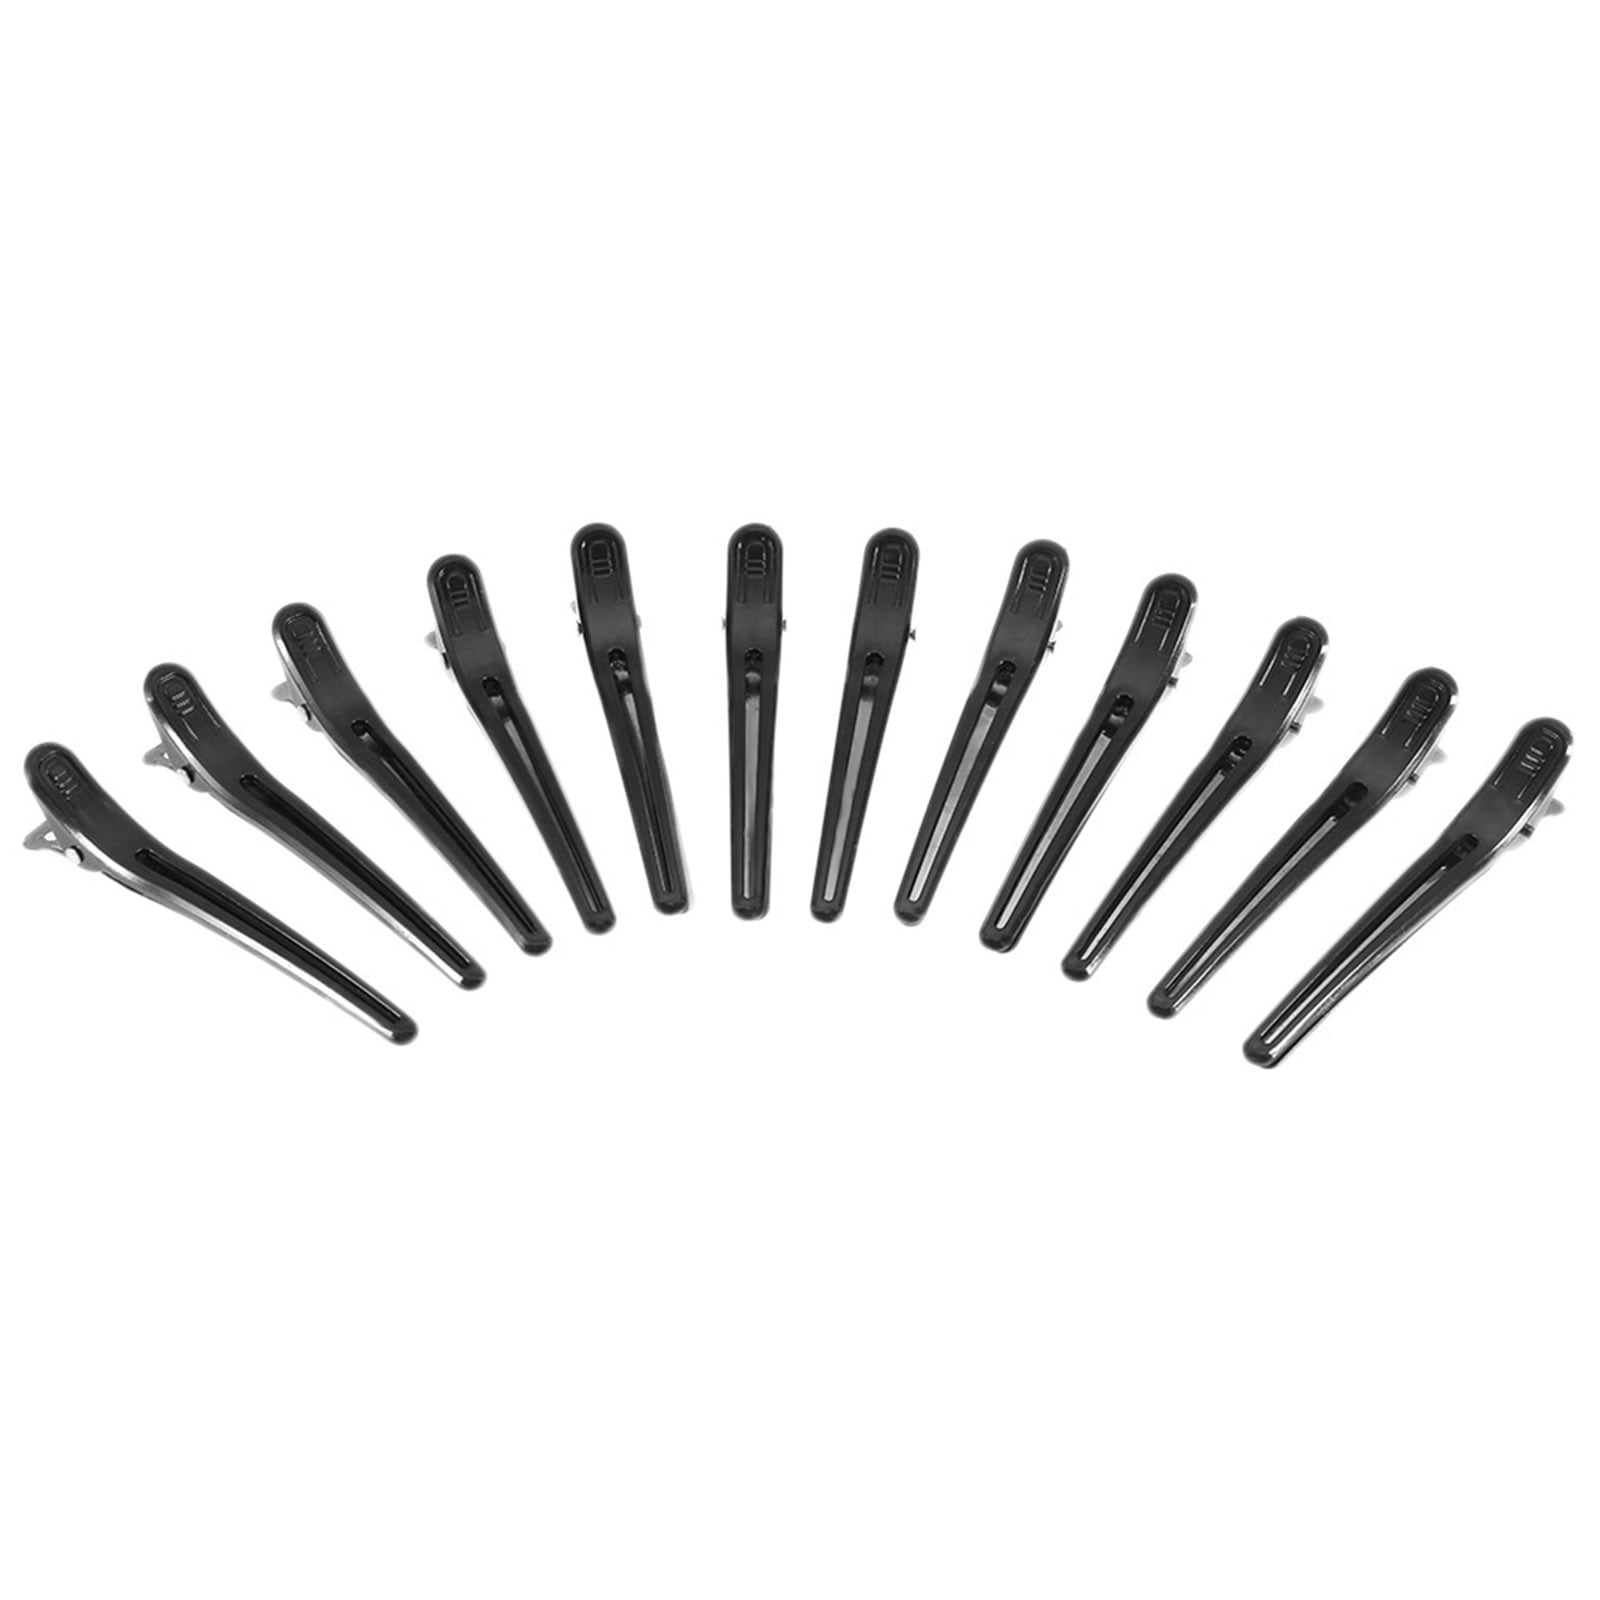 Black 12Pcs Hair Styling Clamps Hairdressing Salon Hair Grip Clips DIY Tools 